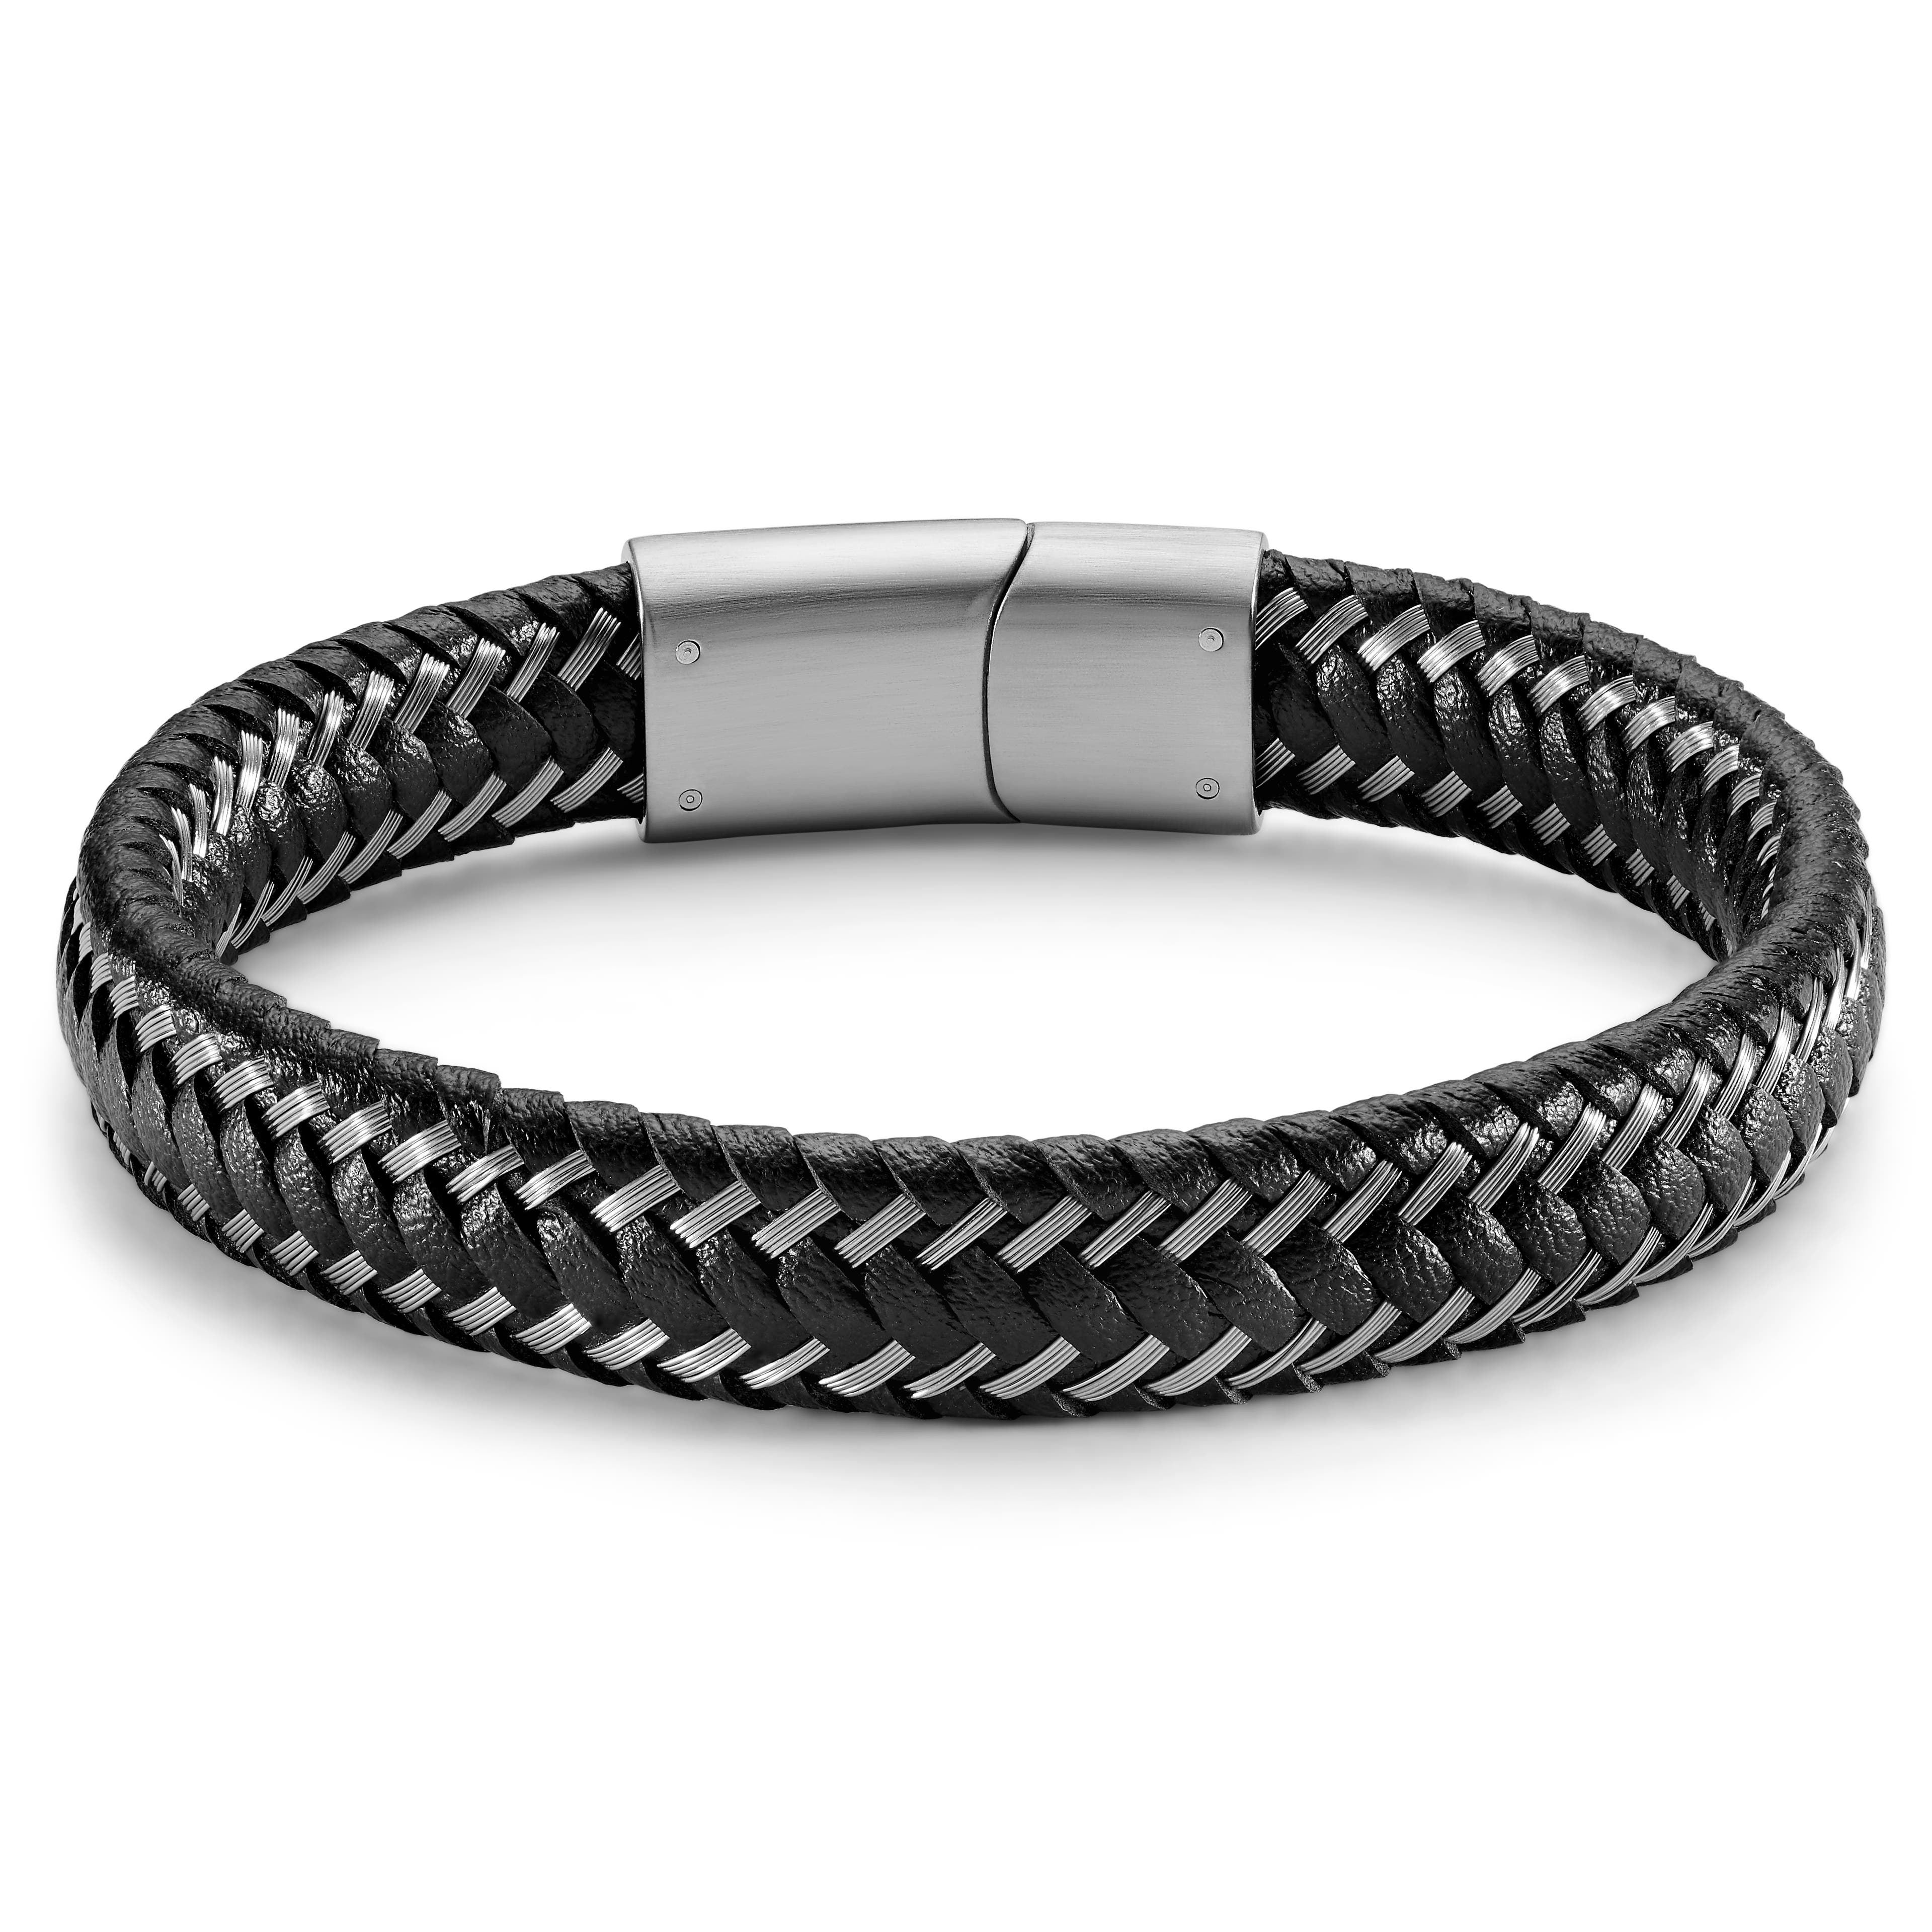 Black Leather & Stainless Steel Braided Bracelet | In stock! | Lucleon